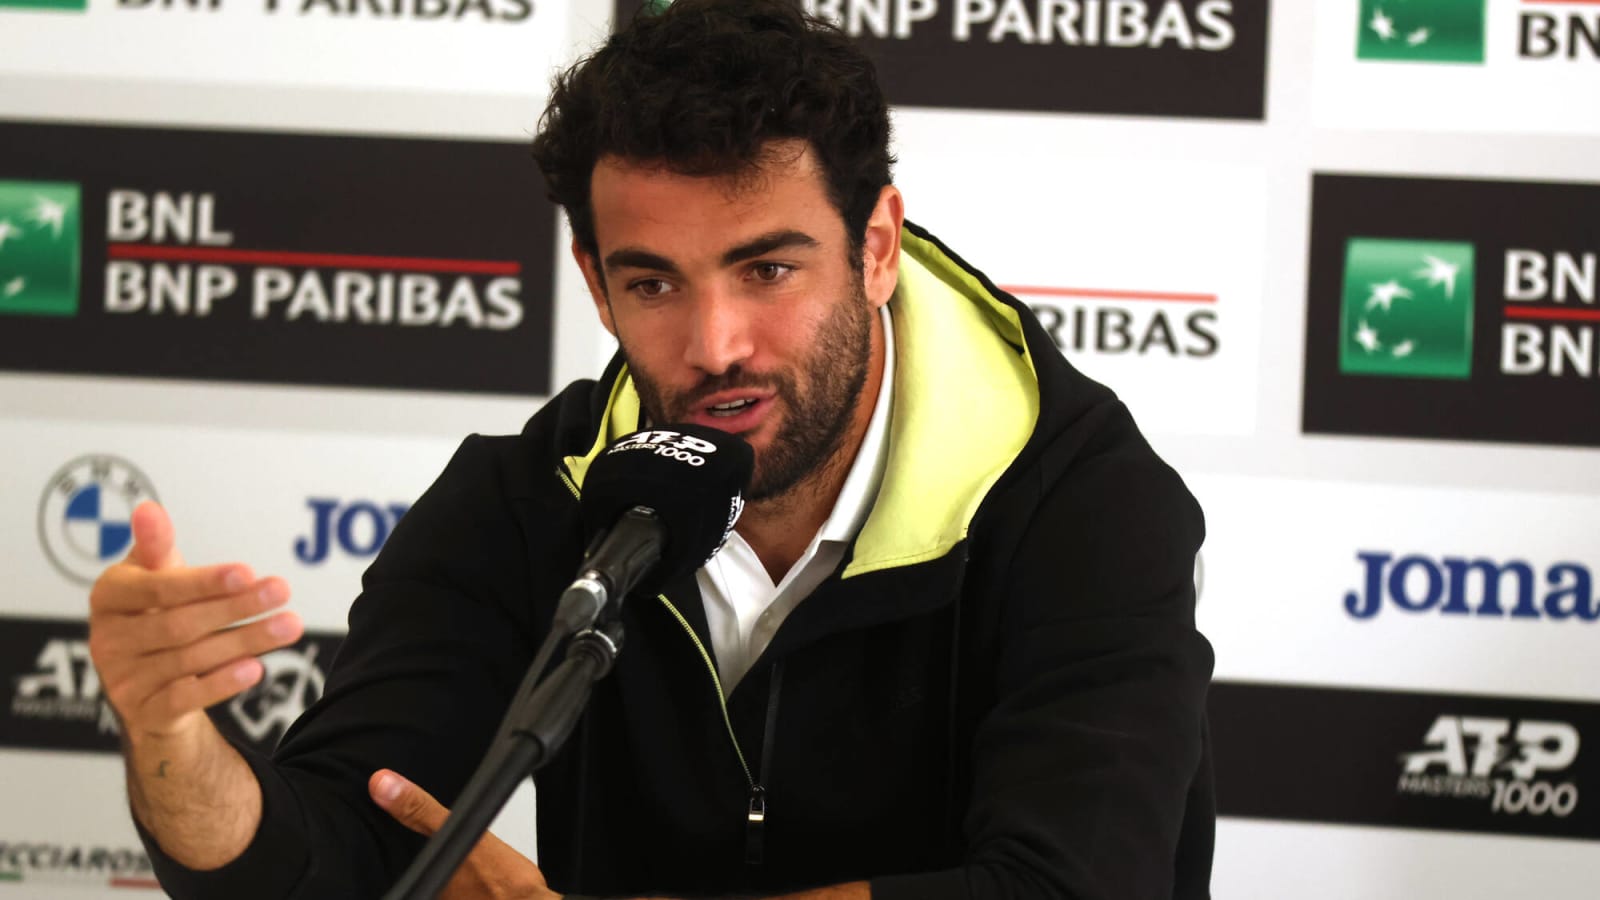 'I’ve been in his shoes,' Matteo Berrettini wishes compatriot Jannik Sinner good luck after he withdrew from Rome Open due to injury